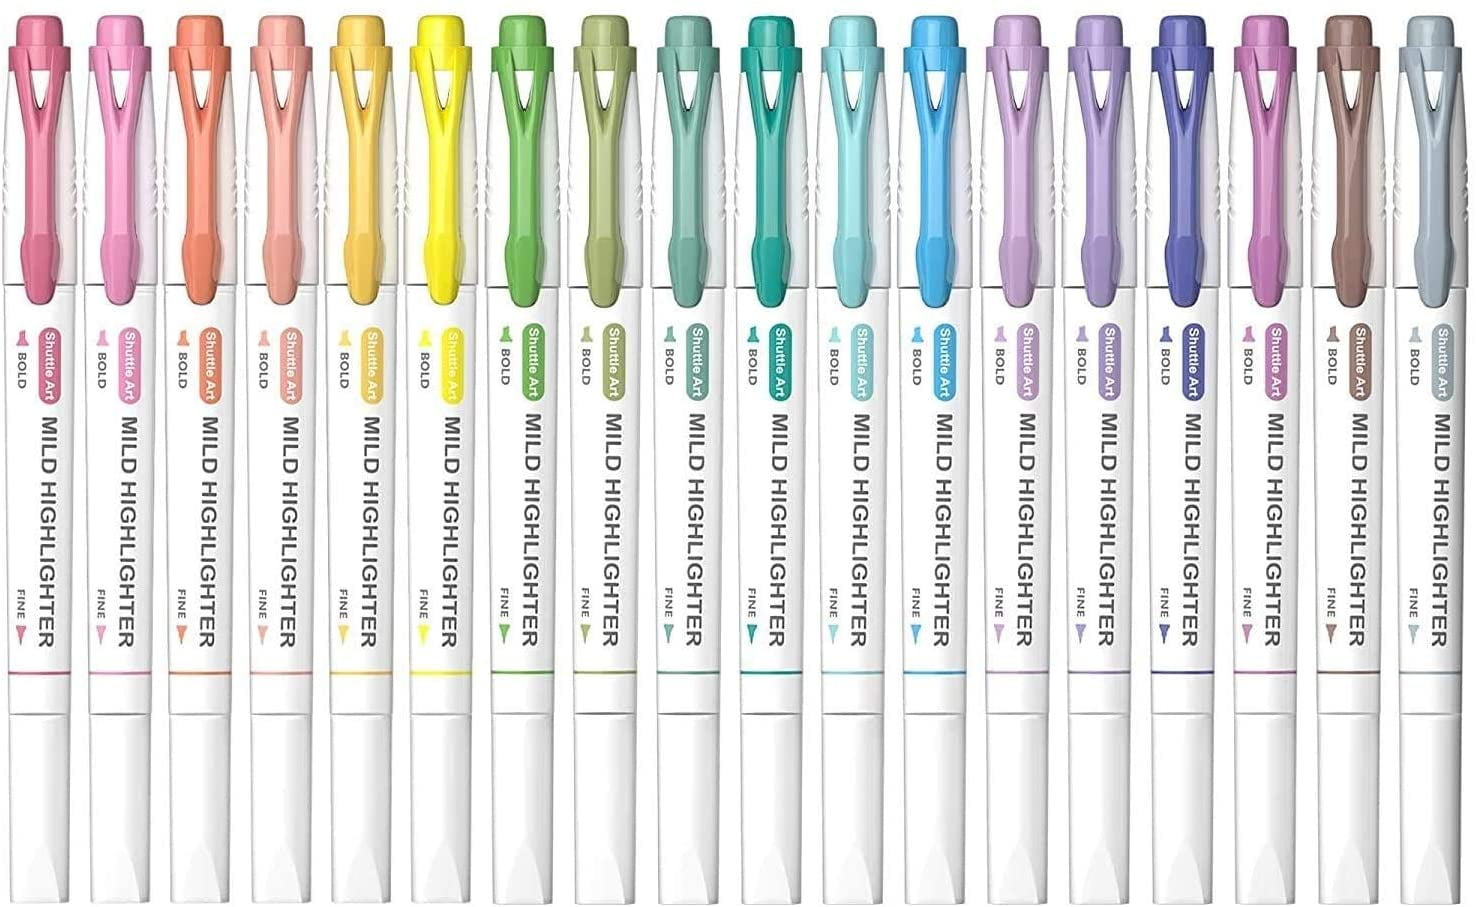 KINGART® Twin-Tip® Creative Markers, Soft Mild Pastel Highlighter Pens,  Broad & Fine Tips, Set of 8 in 2023